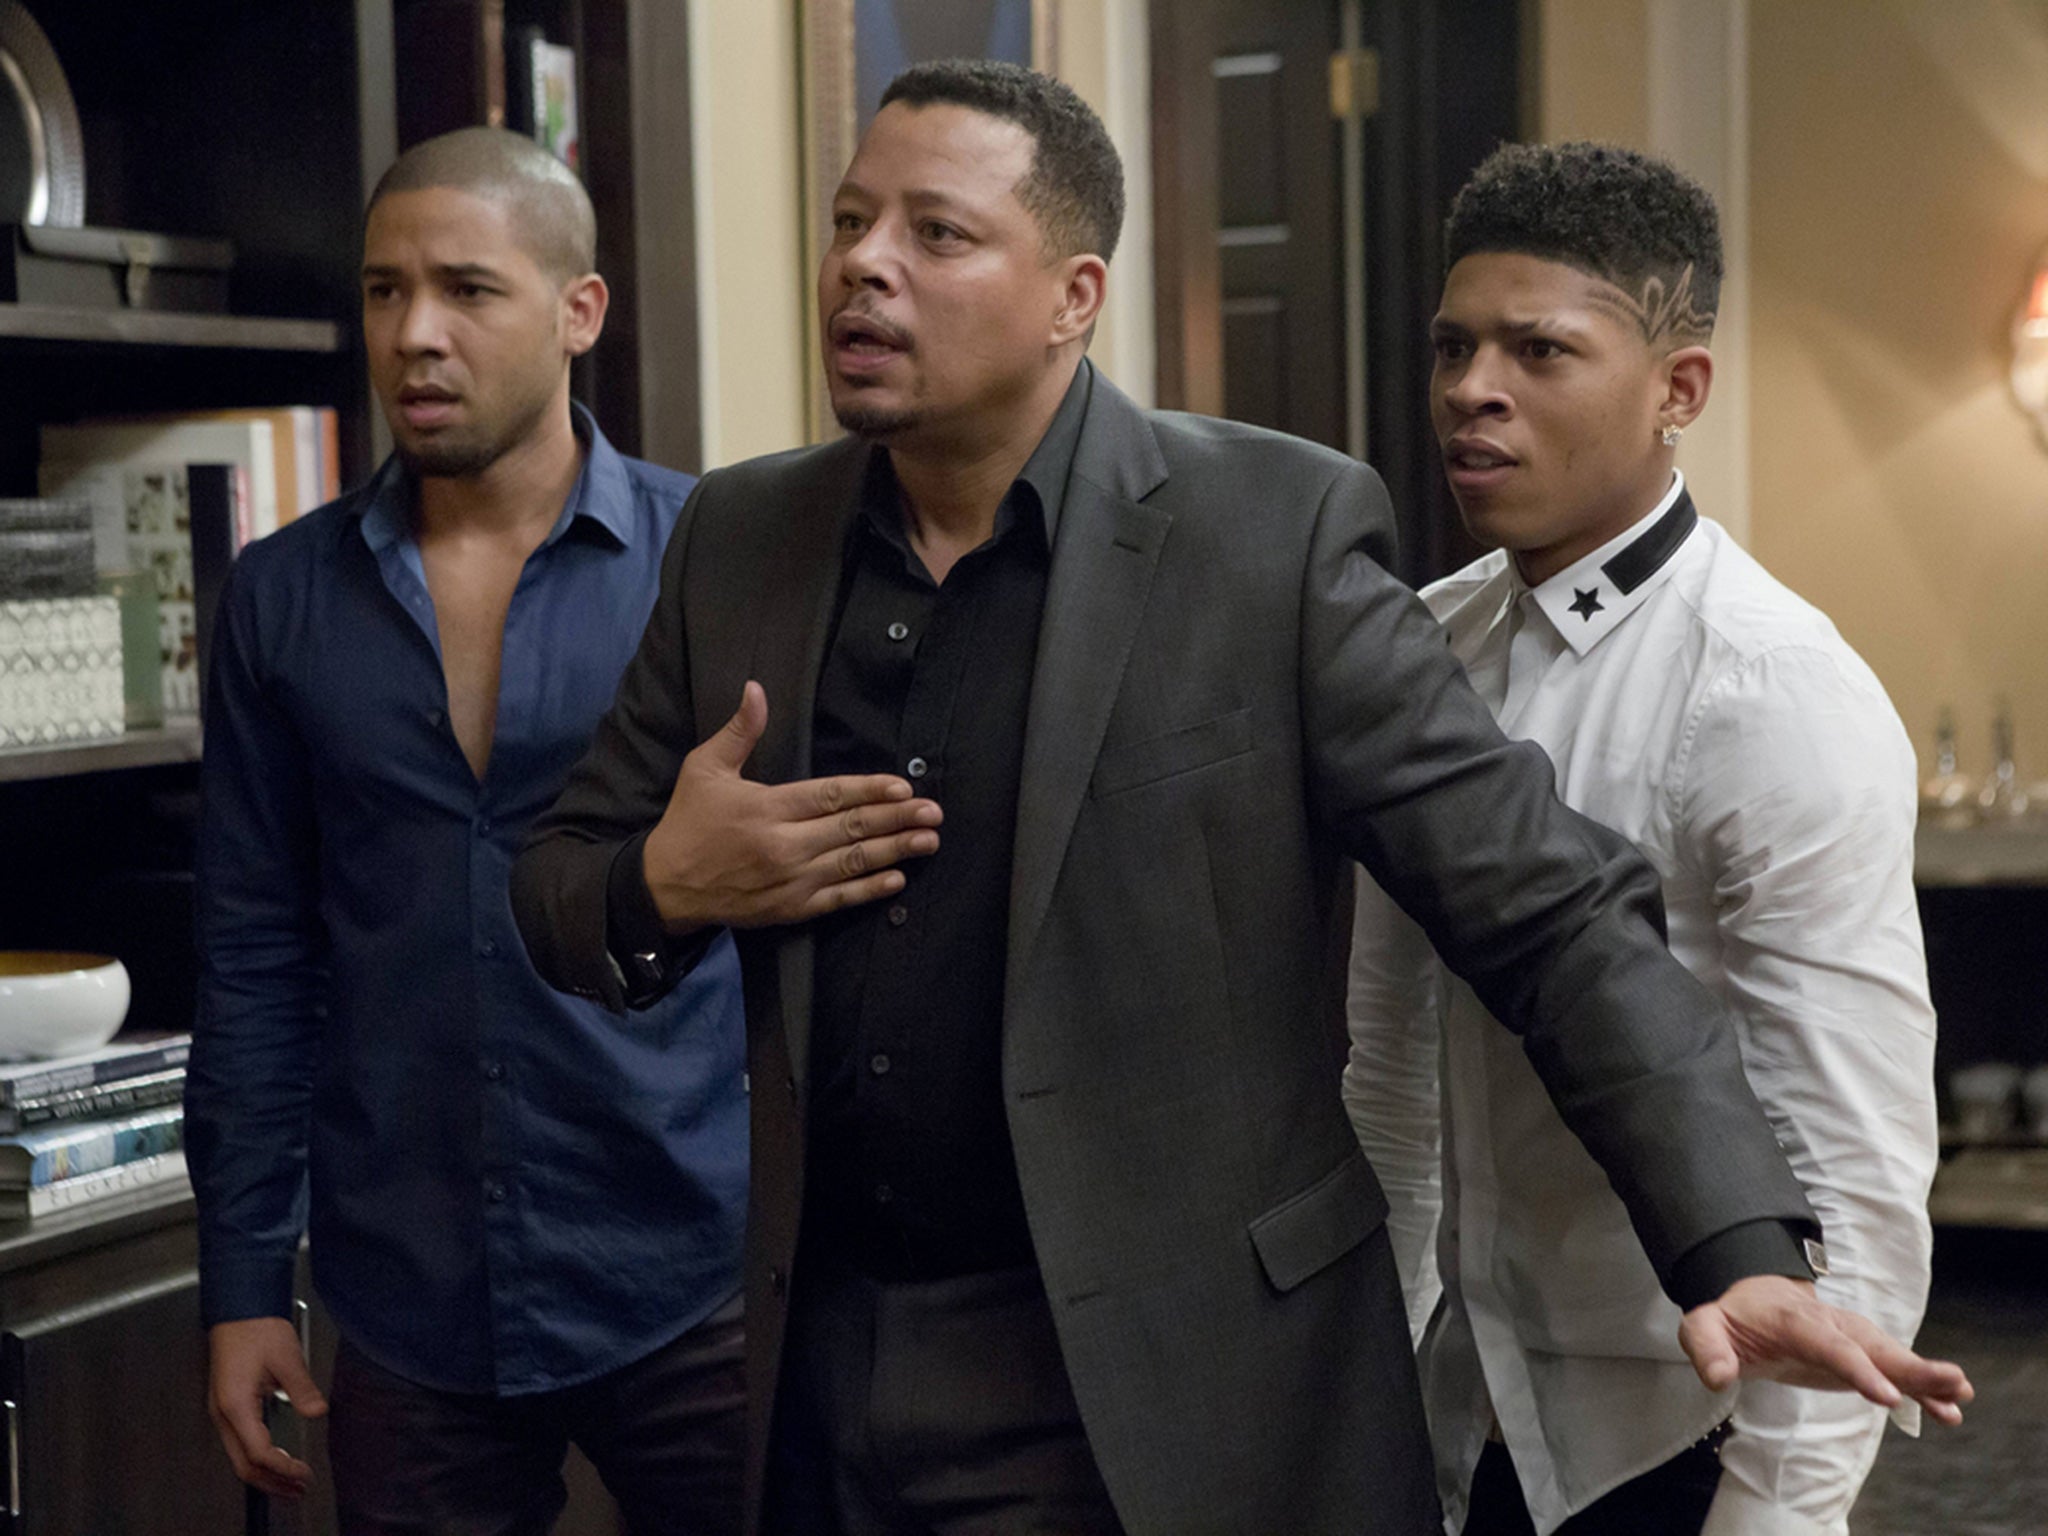 ‘Empire’ – starring Terrence Howard as Lucious Lyon